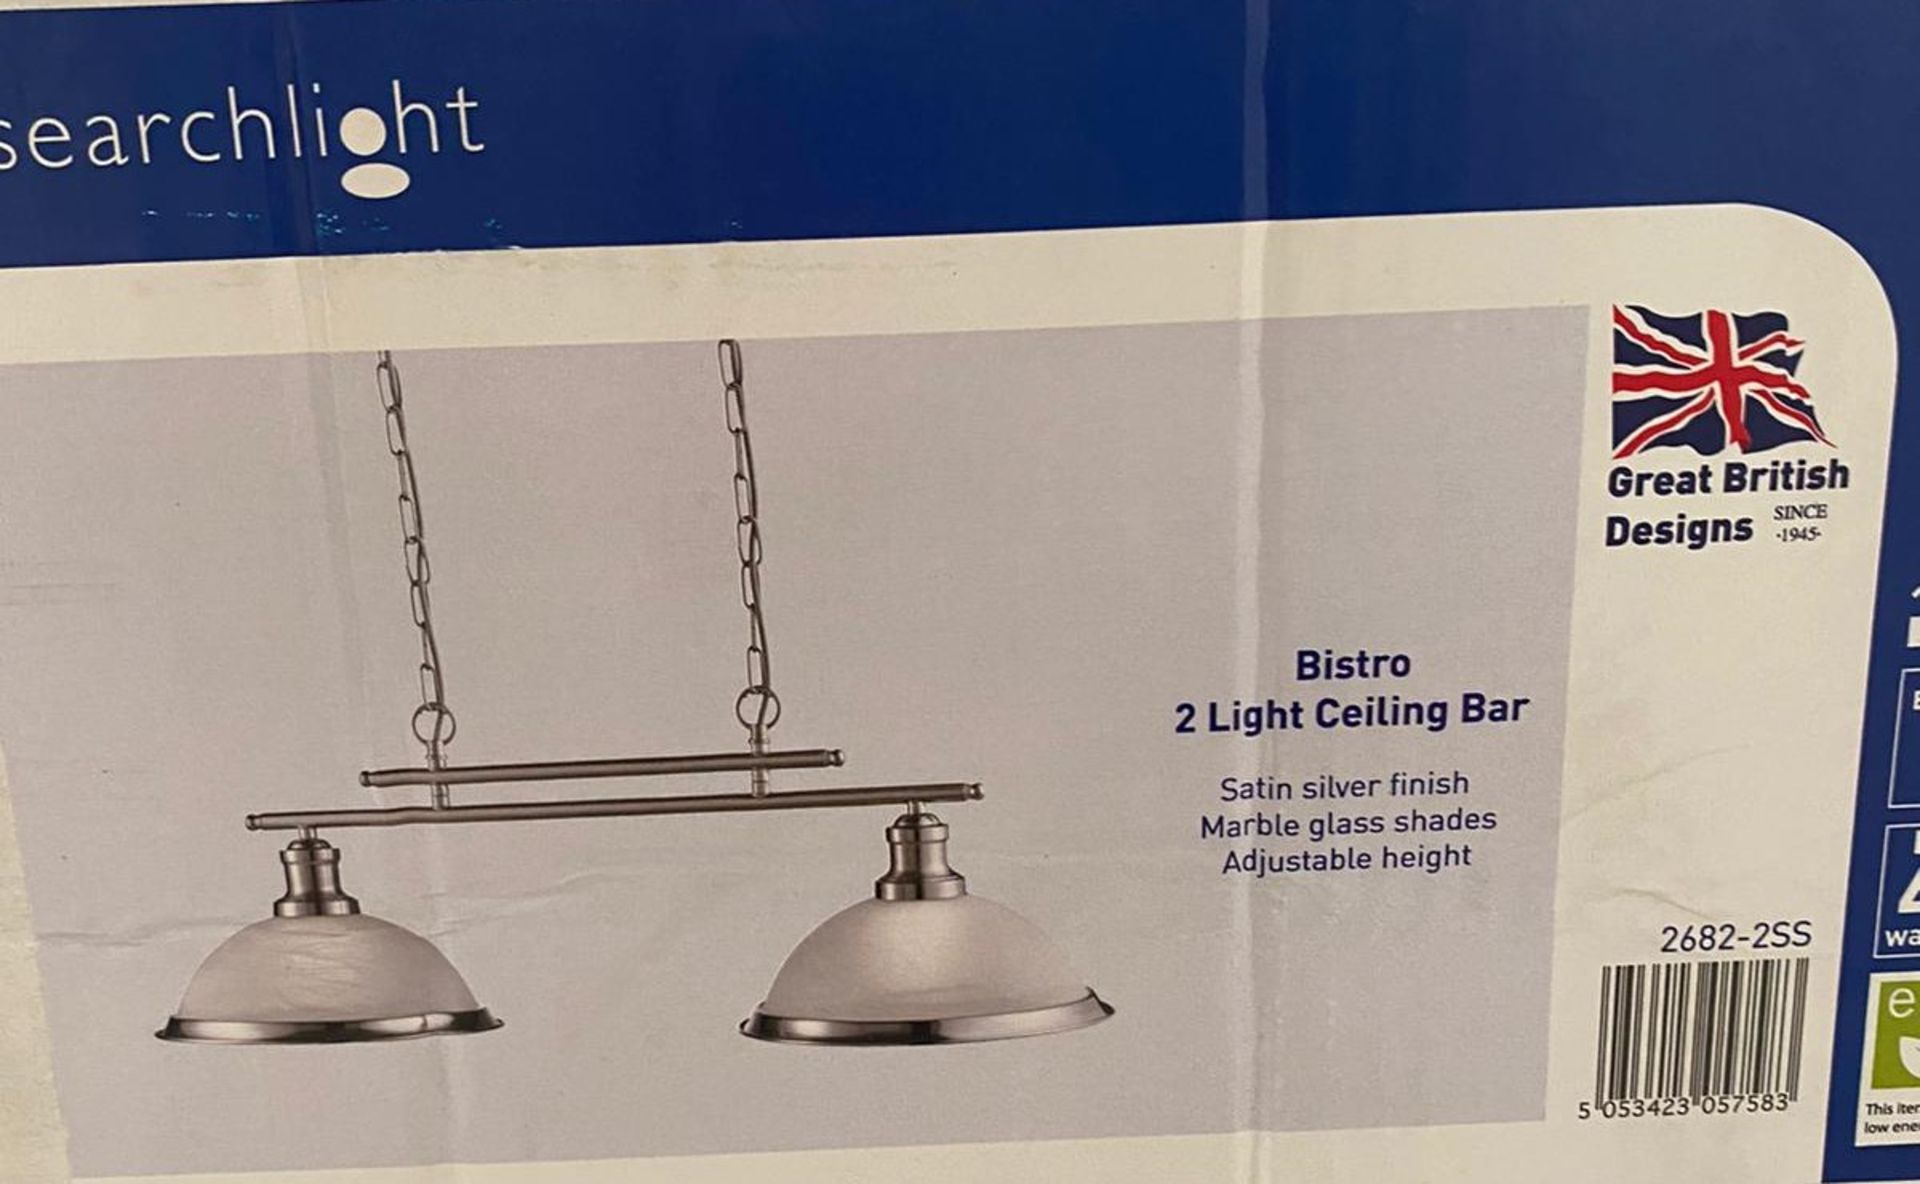 1 x Searchlight bistro 2 Light Ceiling Bar in satin silver - Ref: 2682-2SS - New Boxed - RRP: £115